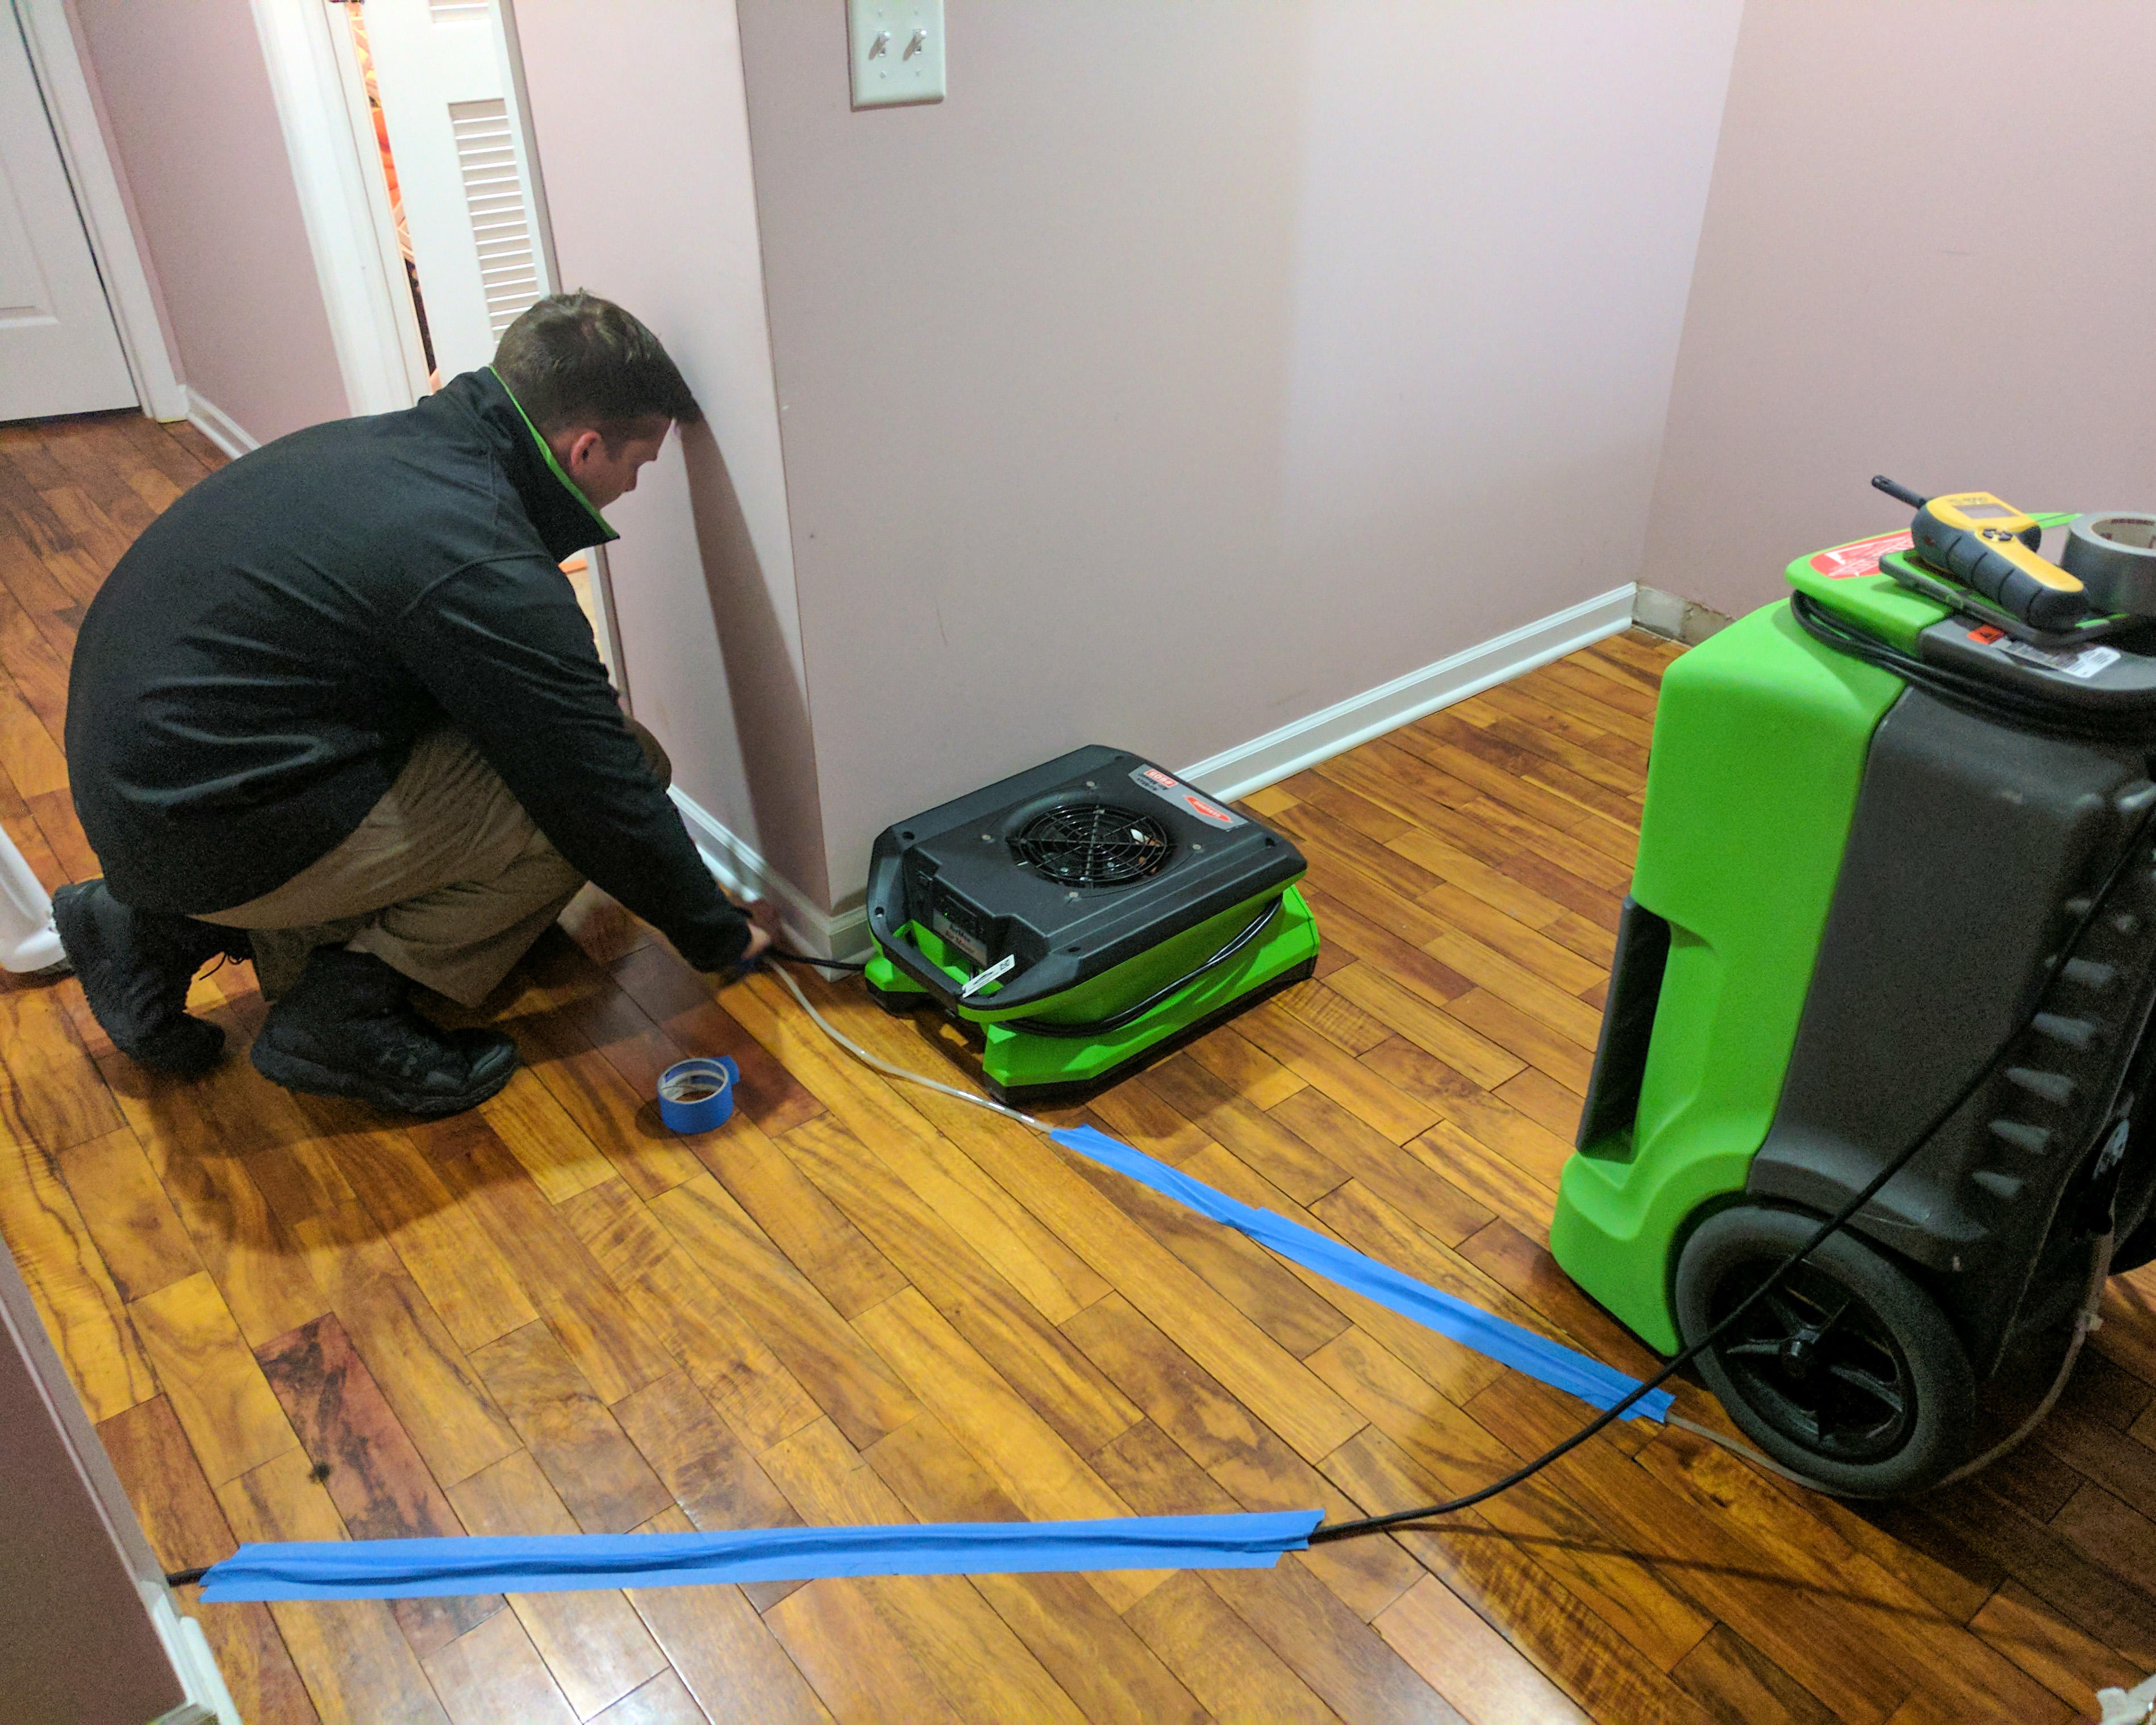 If you have a water event it is important to have a professional extract the water and do the dry-out to minimize damage to your property. Call SERVPRO of Montclair/West Orange 24/7, 365 for emergency water restoration services.